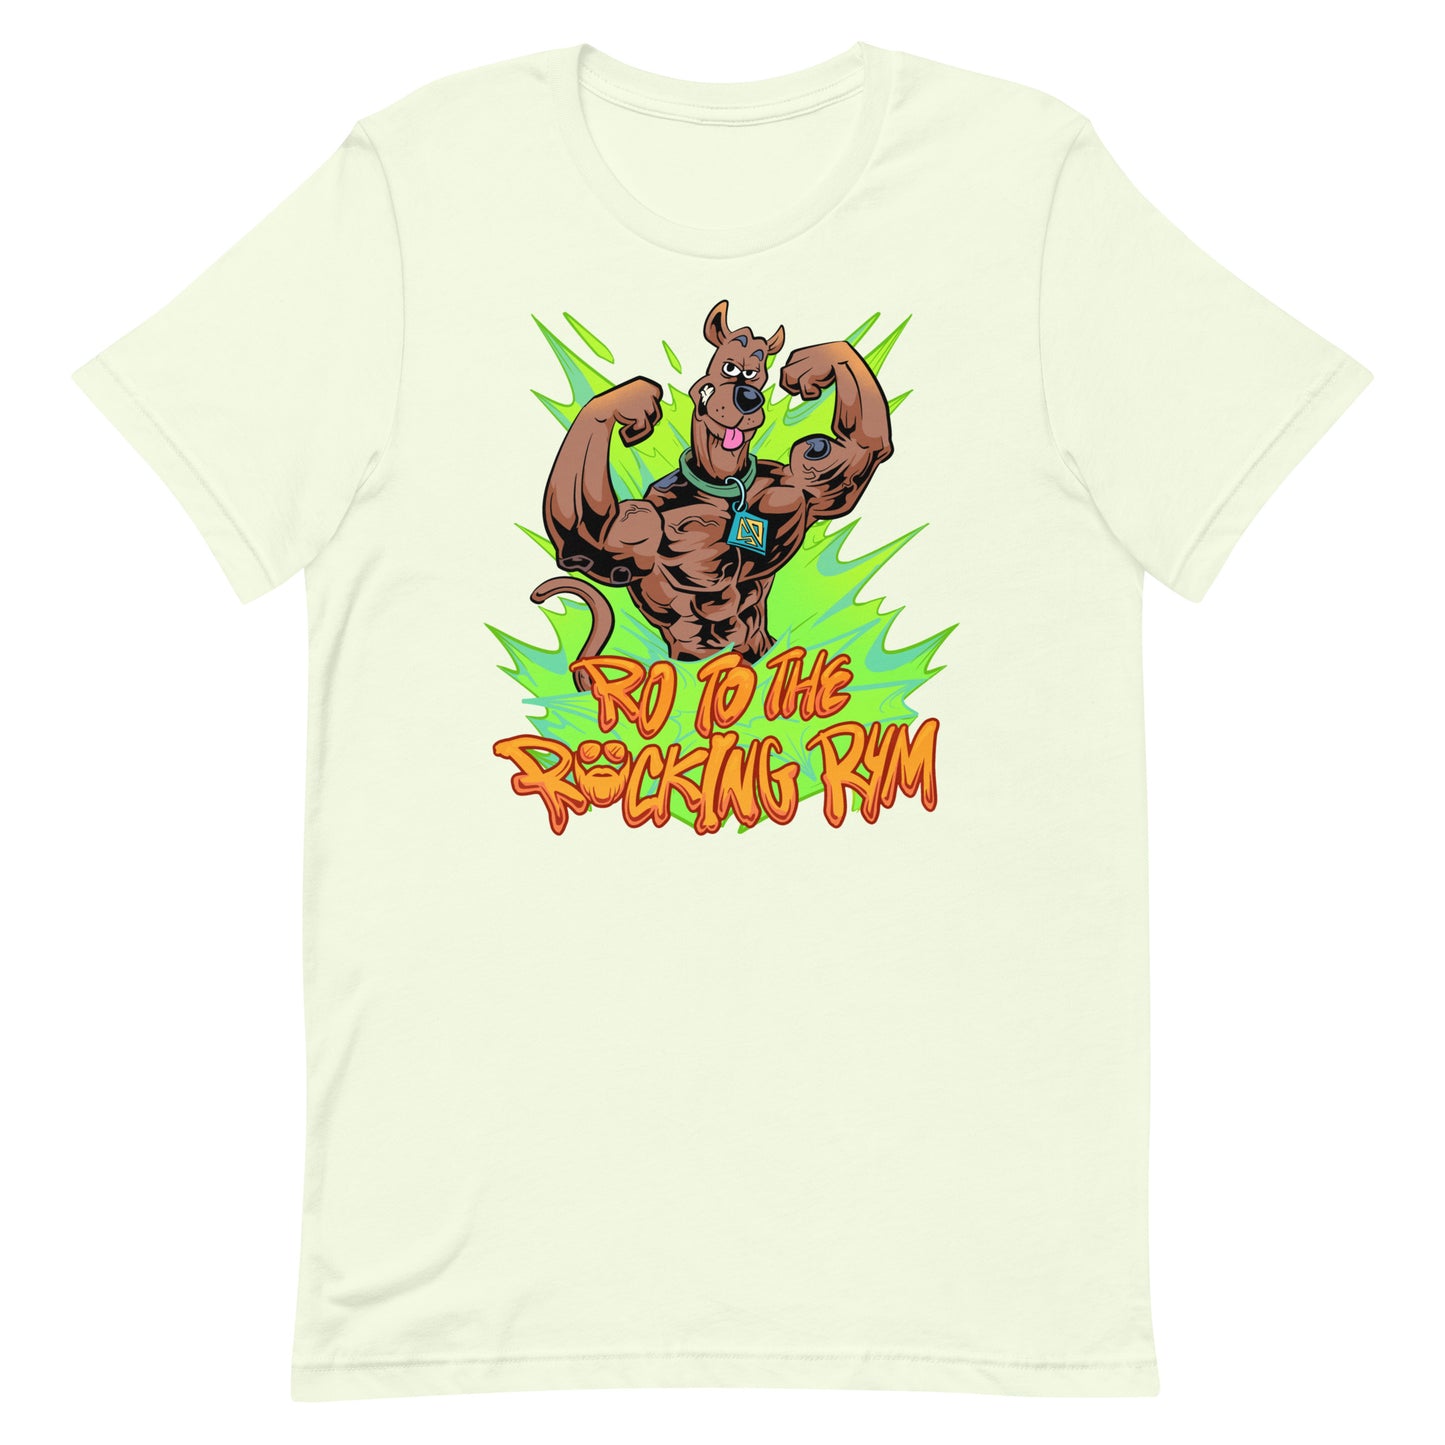 Scooby Go To The F*cking Gym T-Shirt